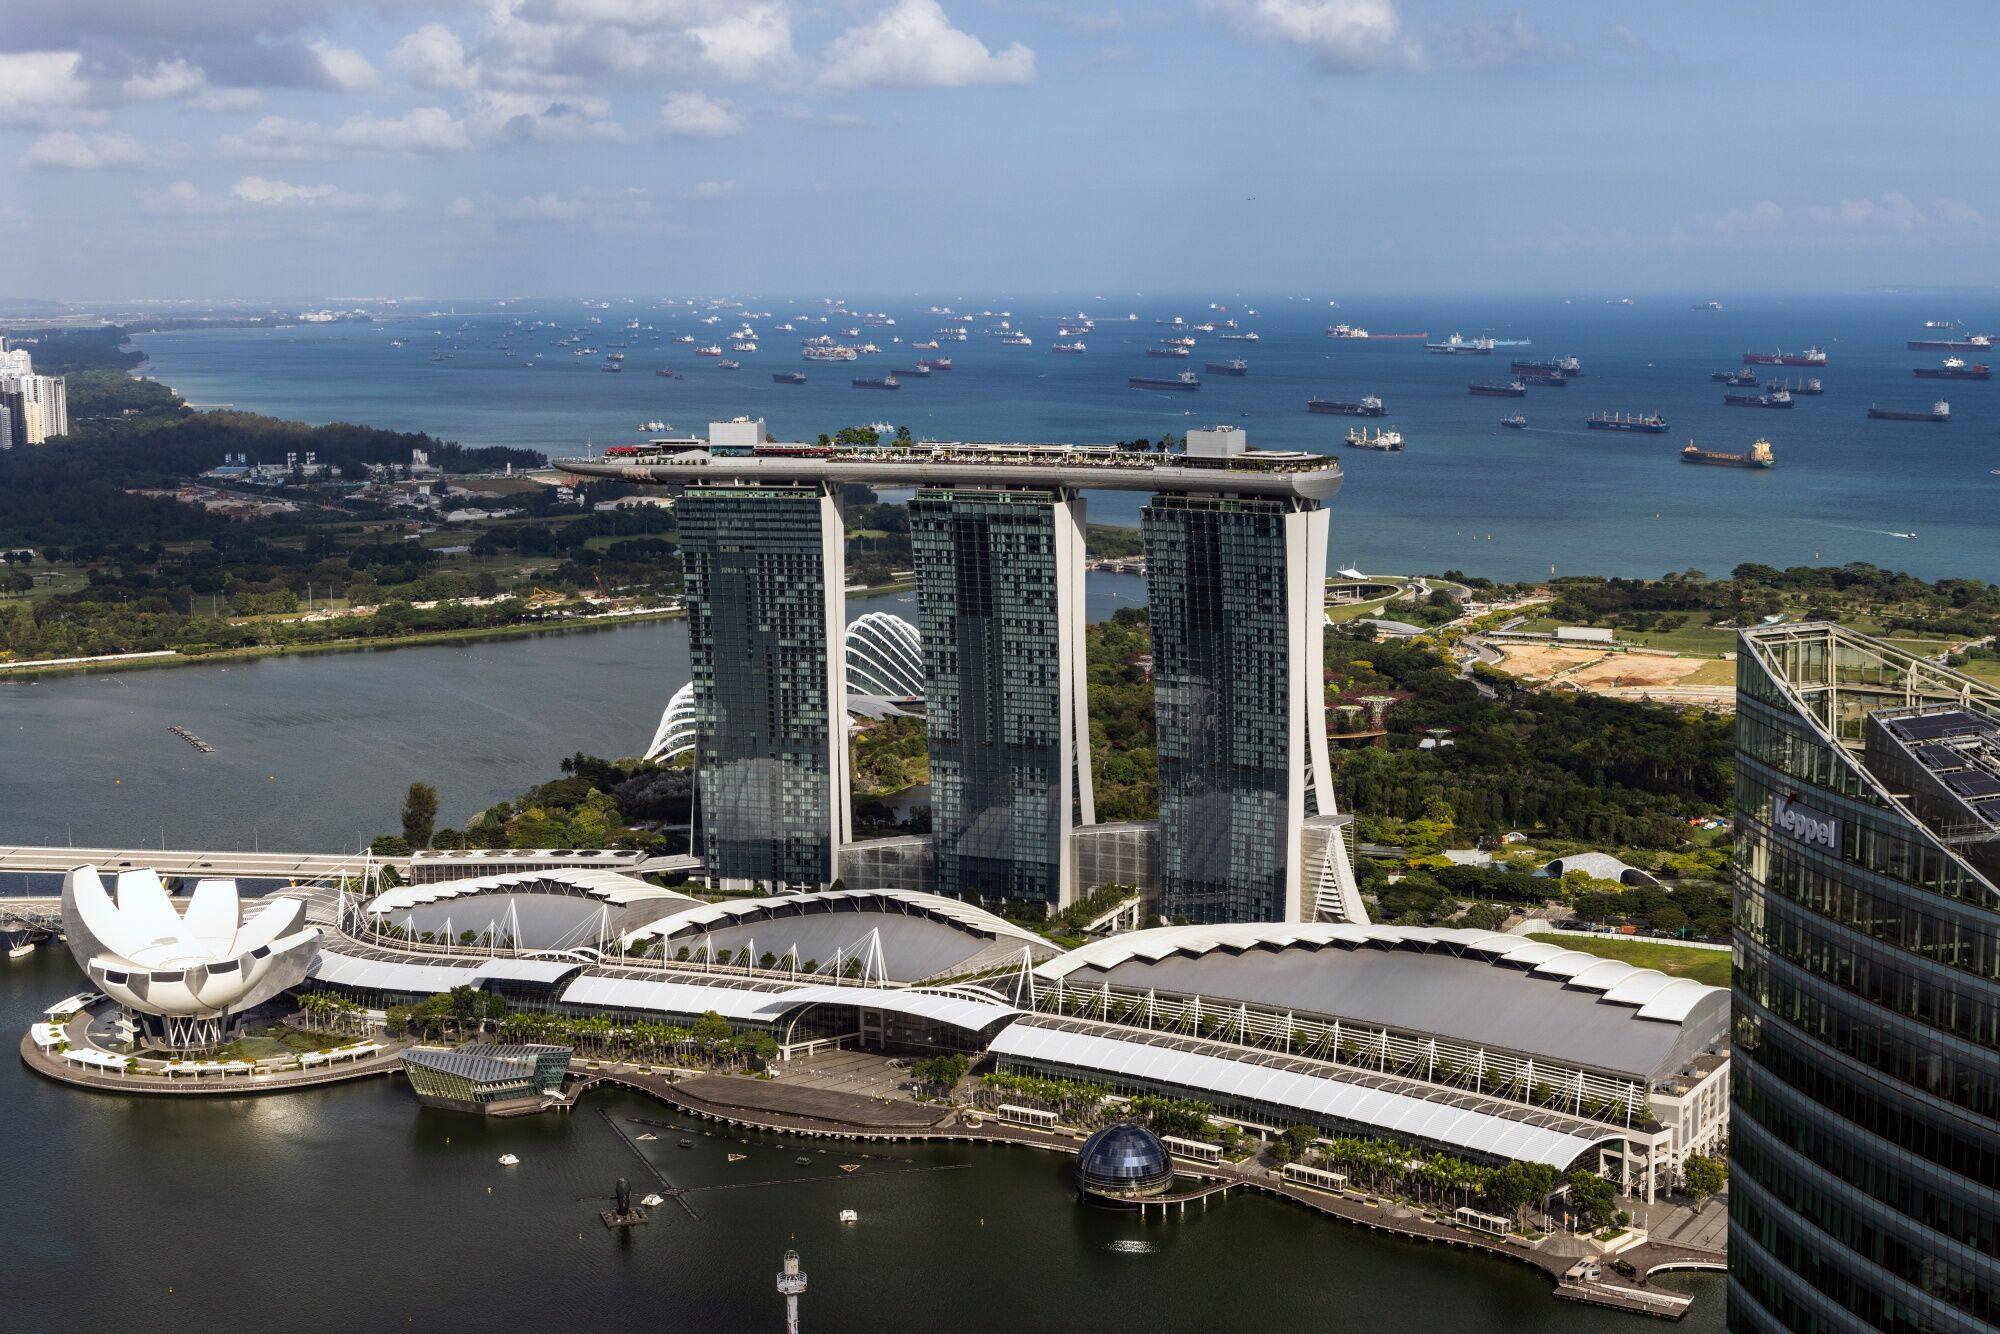 The Marina Bay Sands hotel and casino in Singapore. Photo: Bloomberg